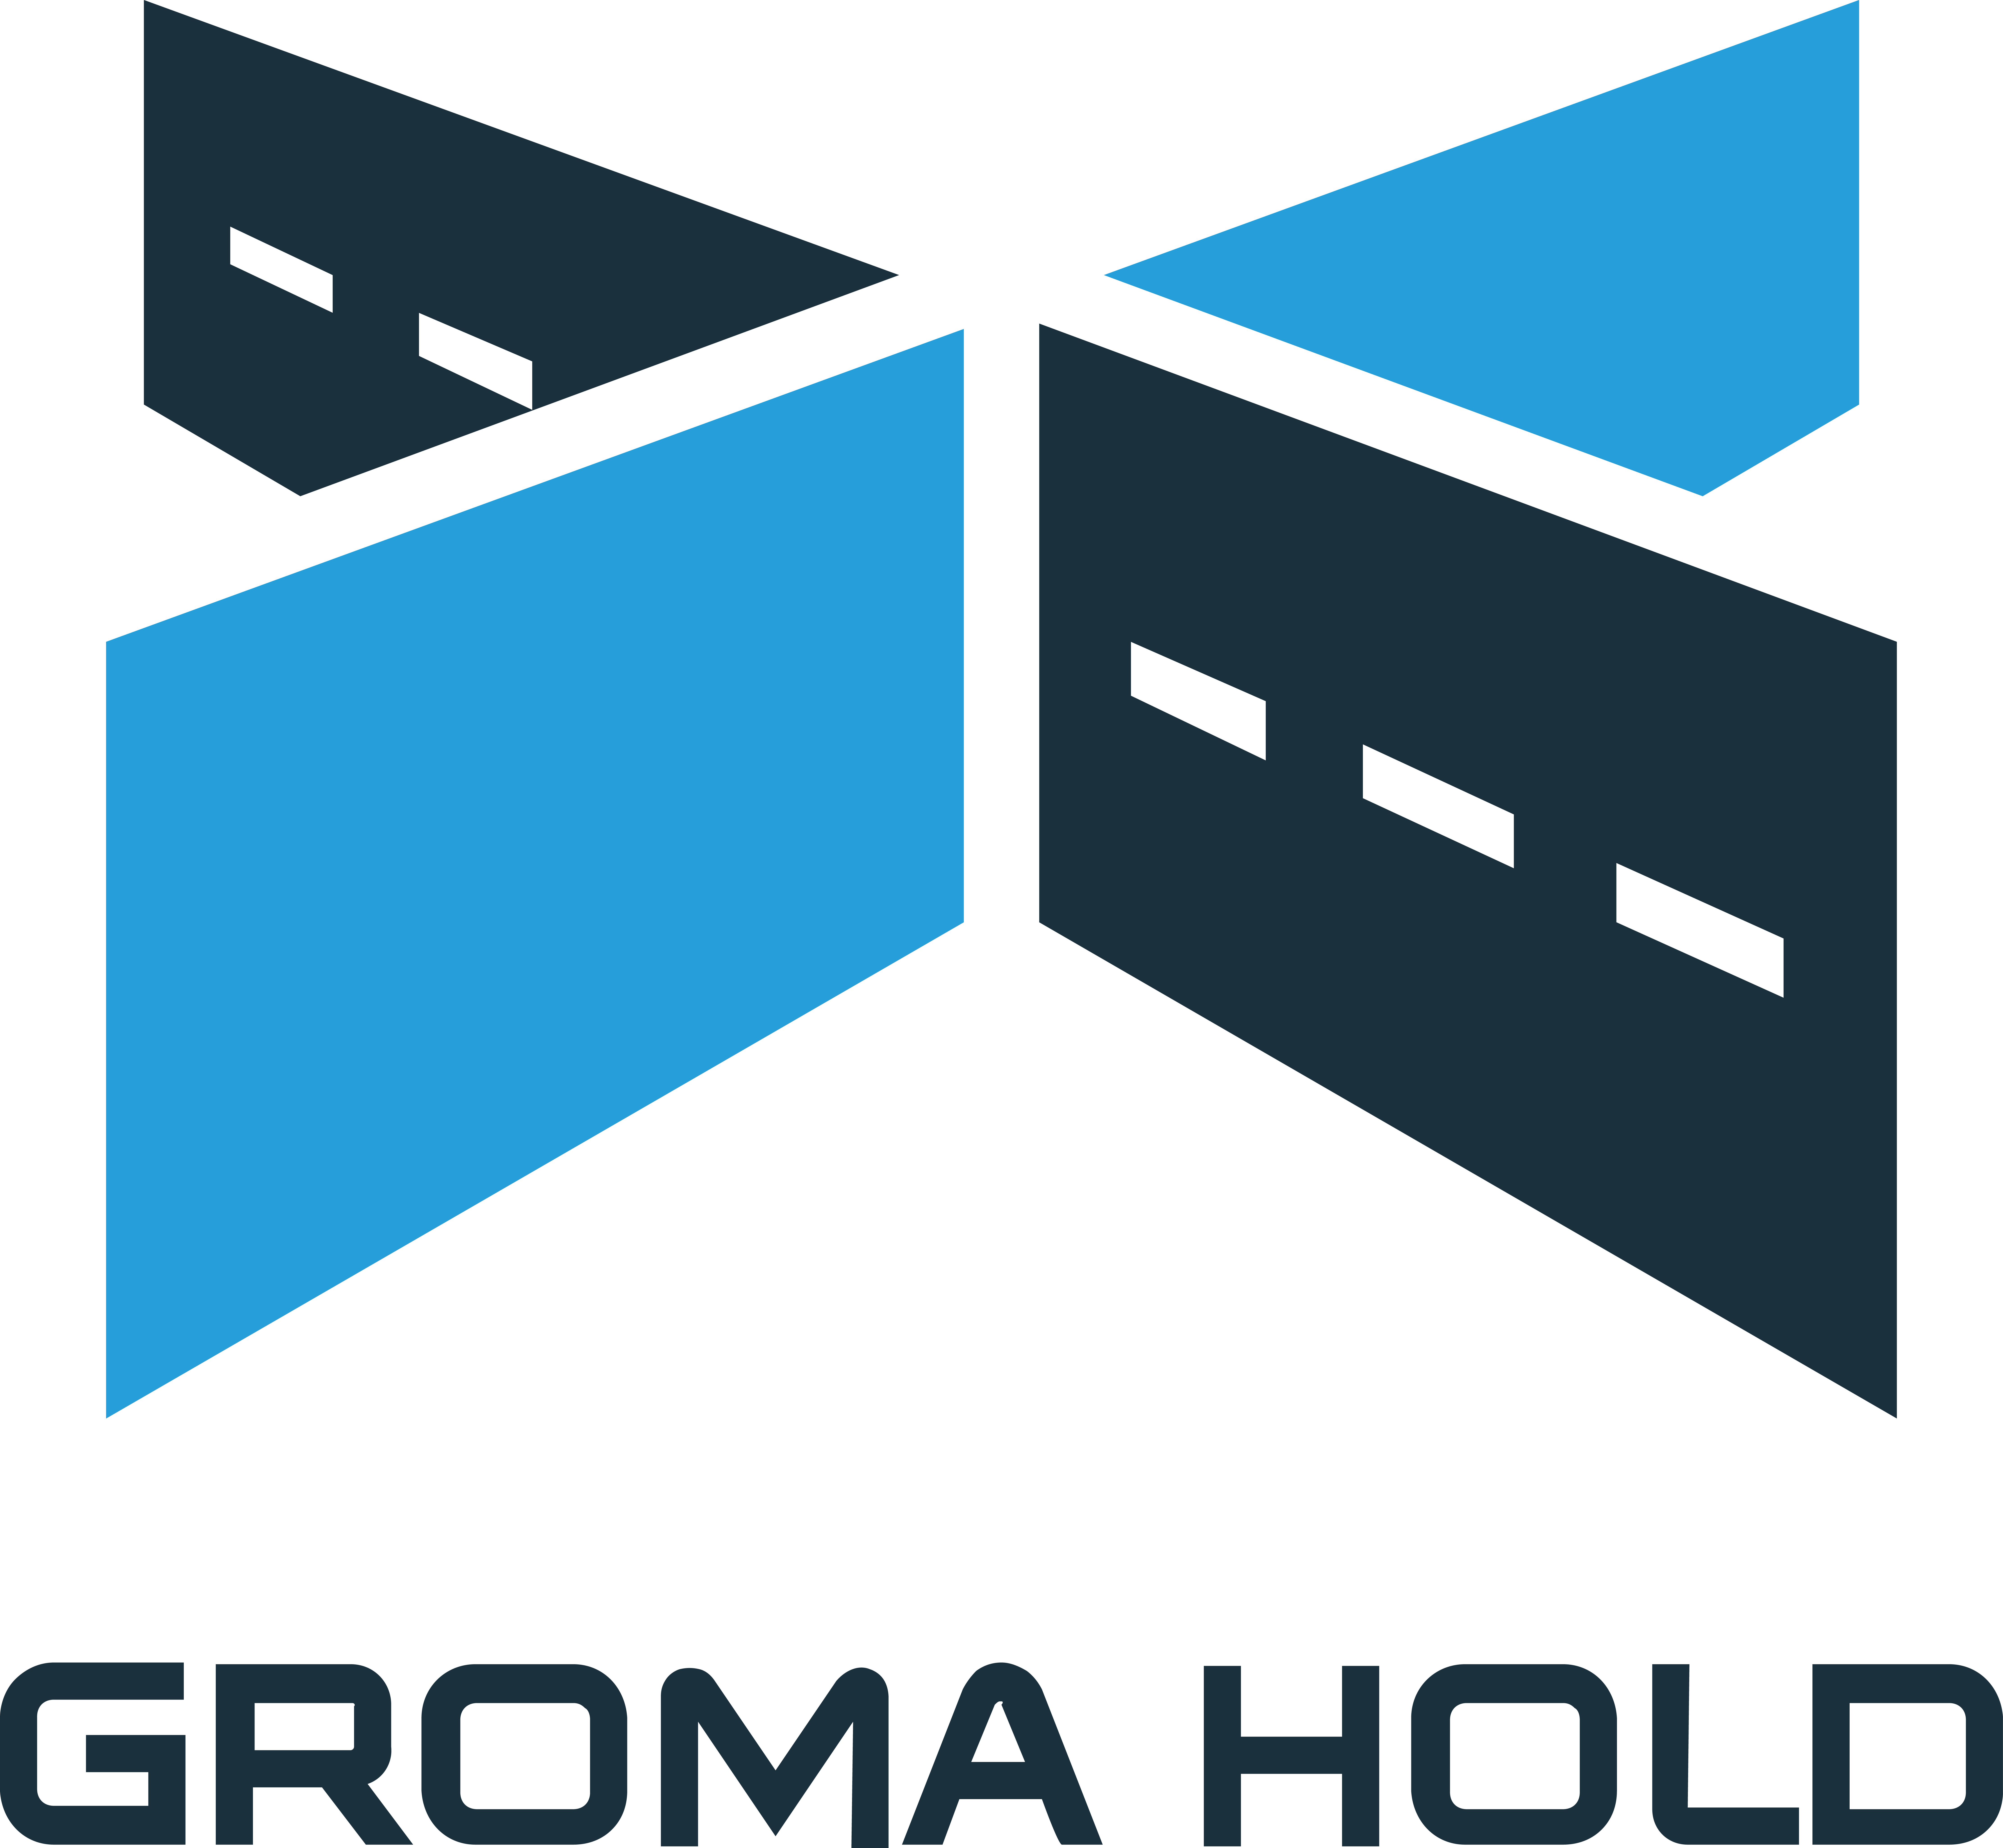 Groma Hold